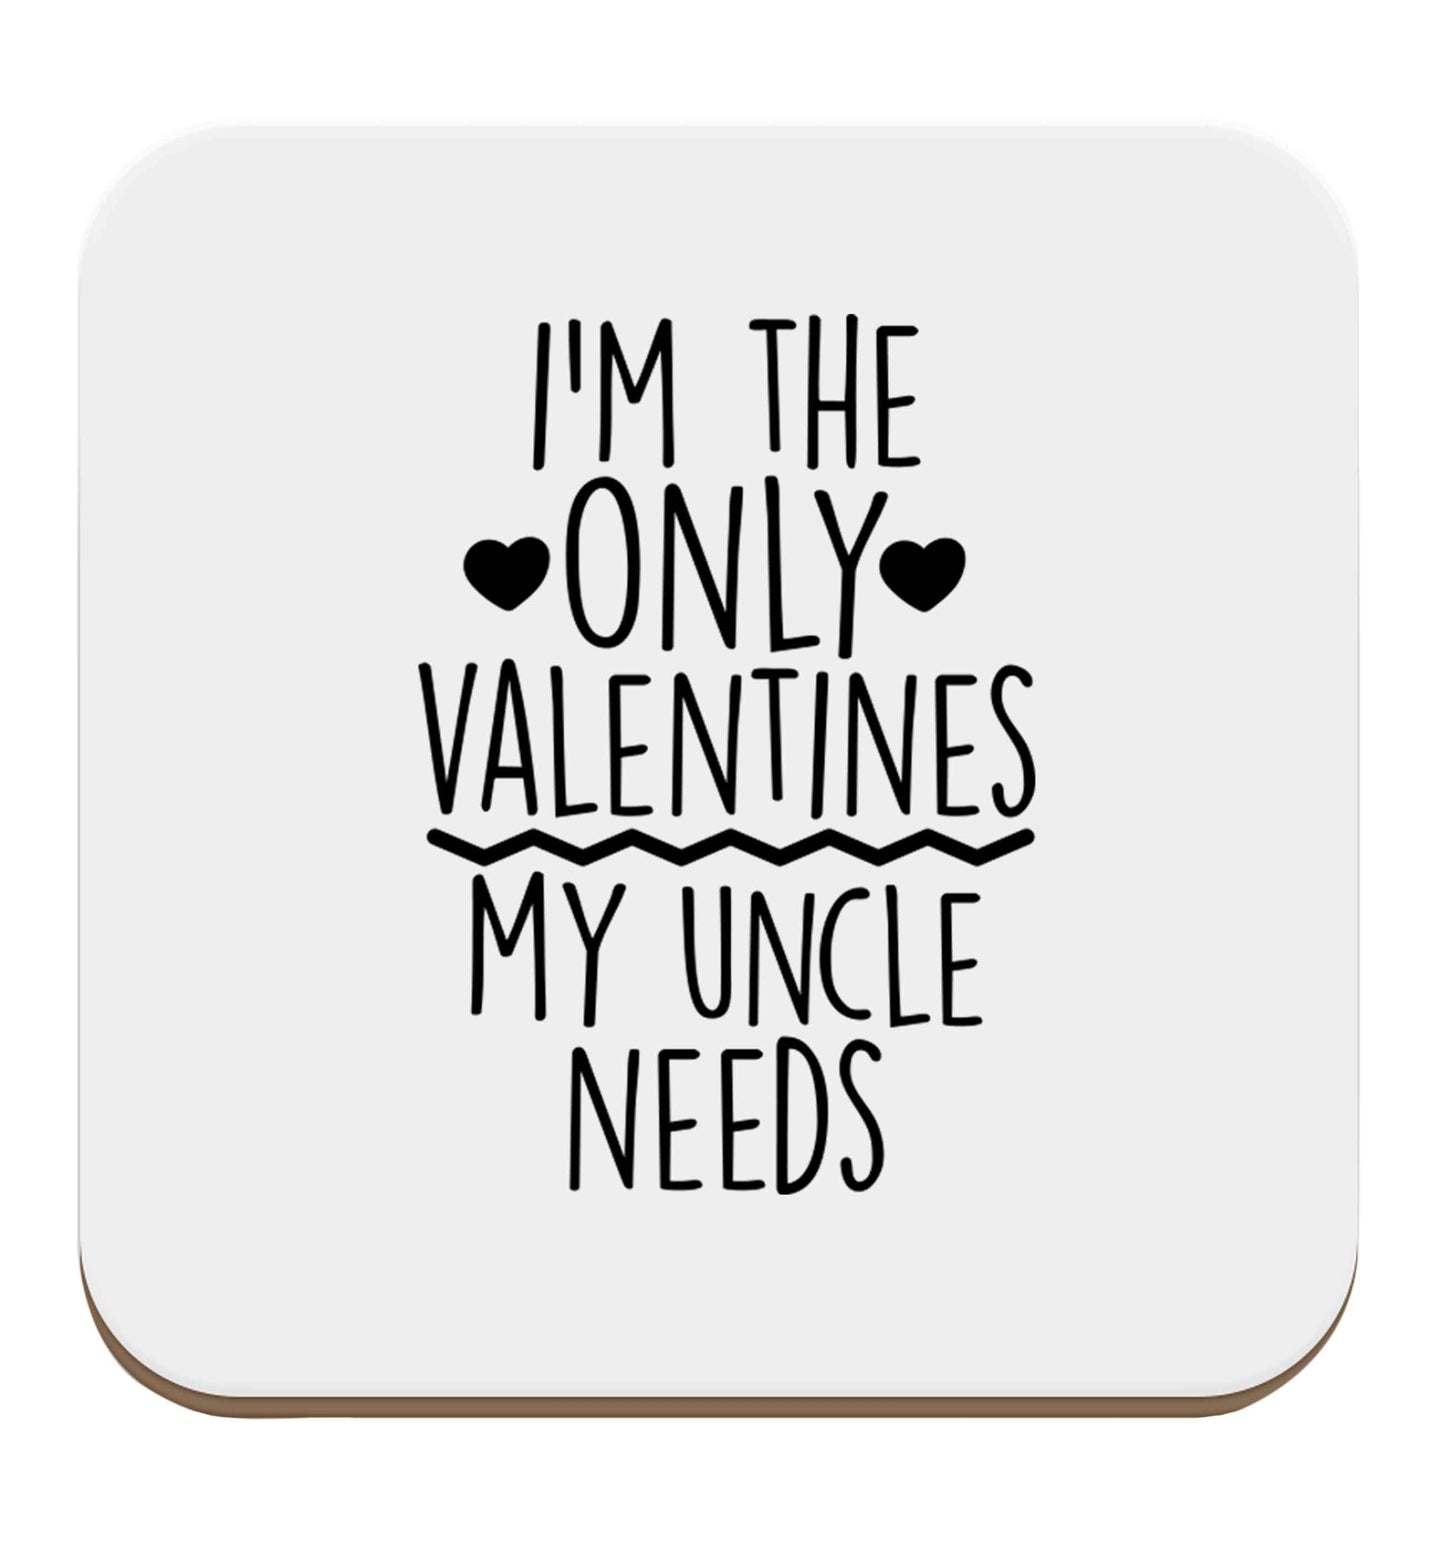 I'm the only valentines my uncle needs set of four coasters